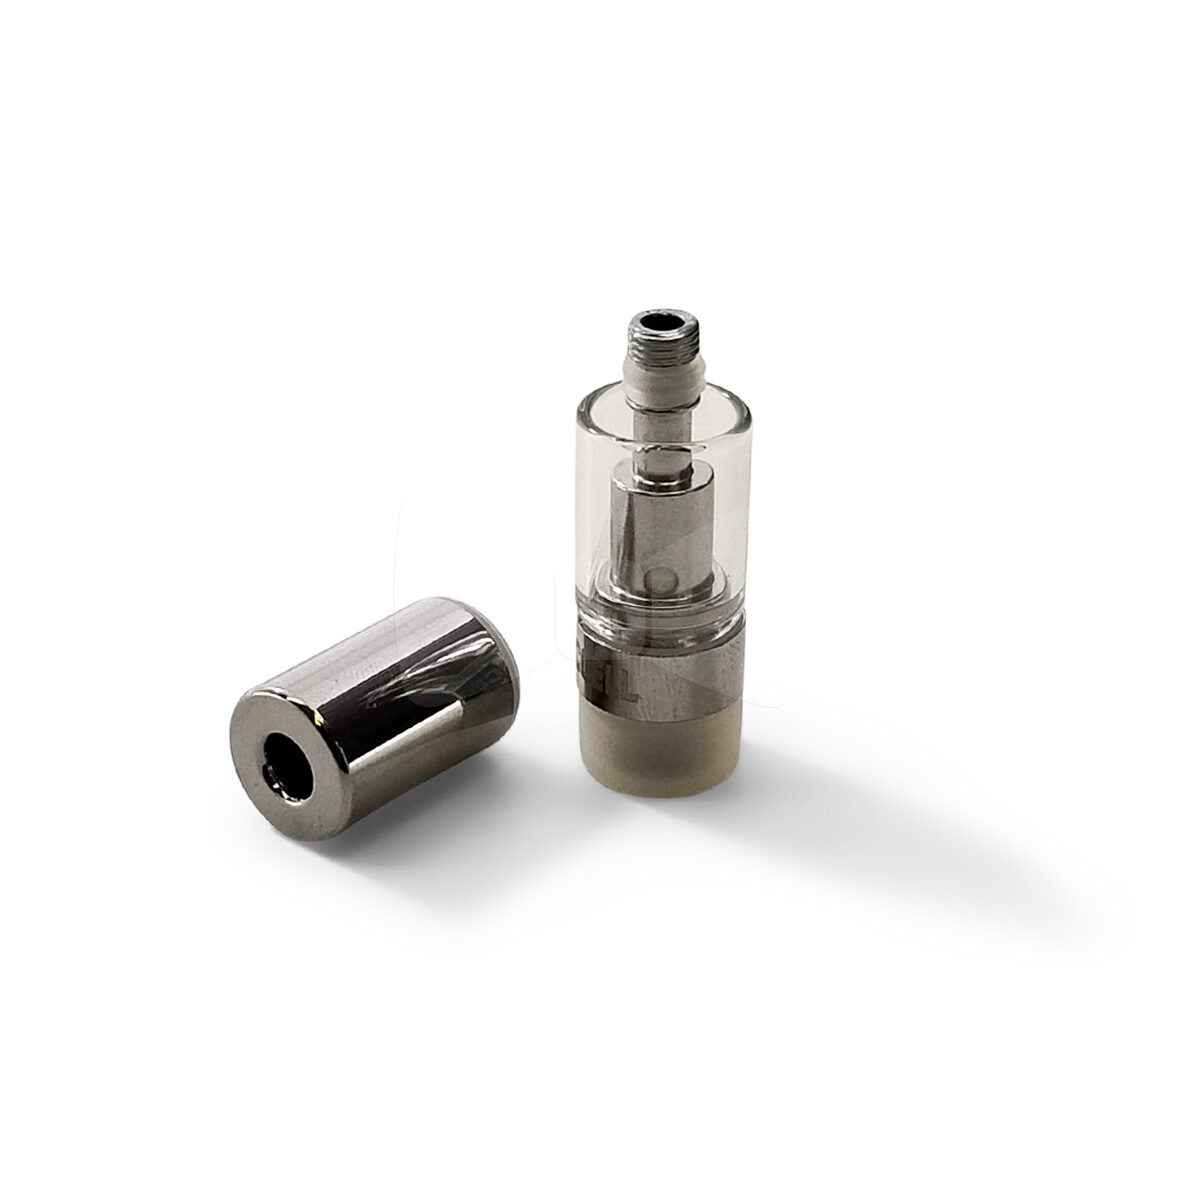 CCell Threaded Cartridge & Mouthpiece Silver .3ML Silver Barrel